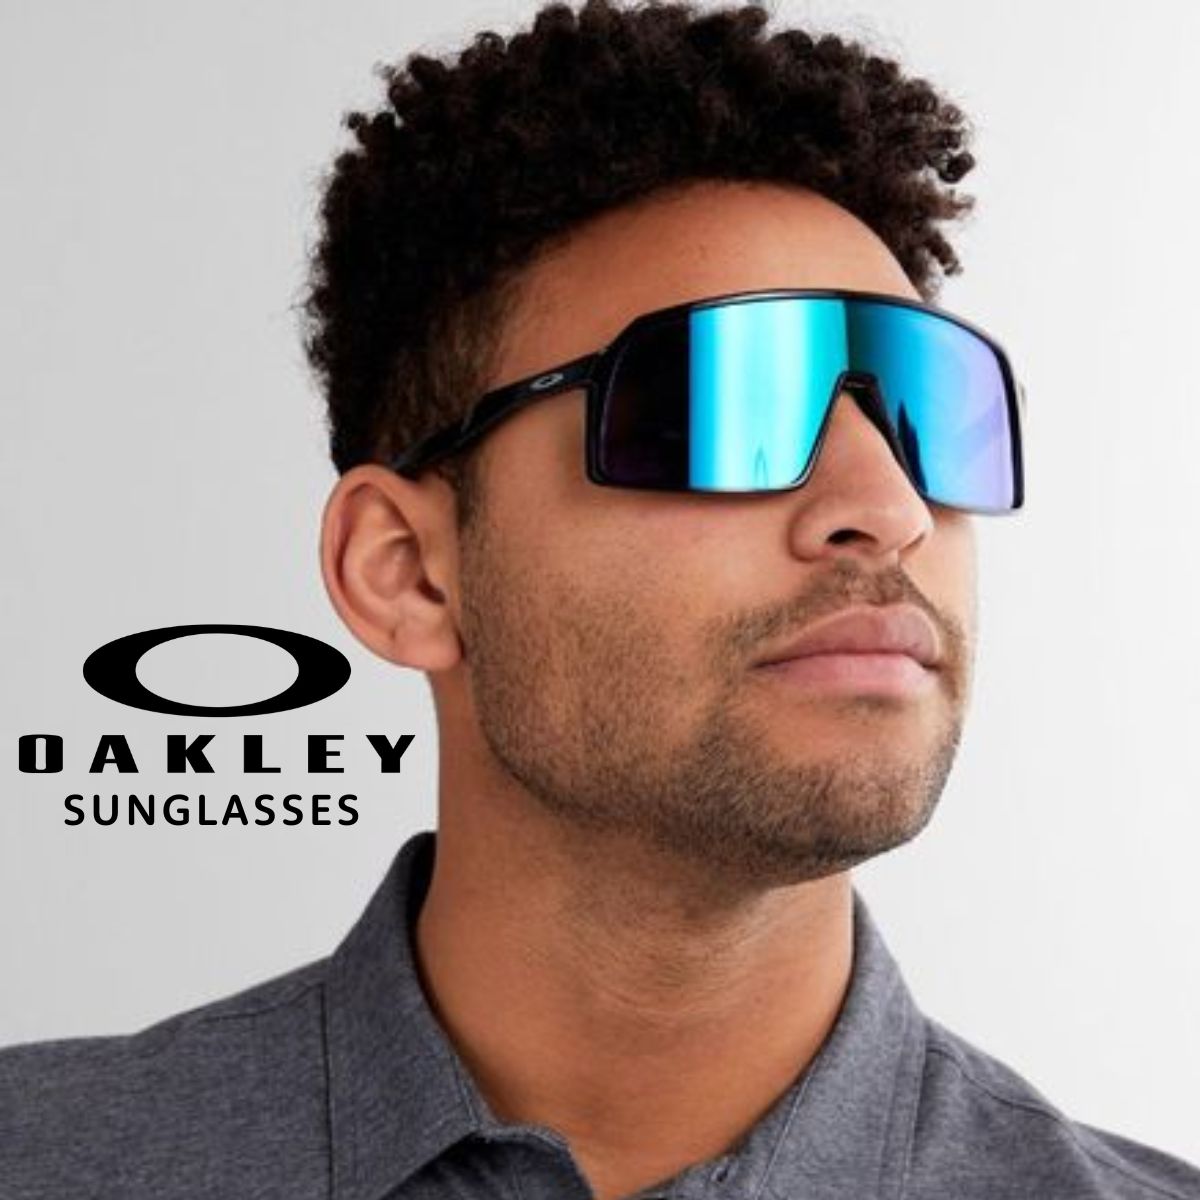 "Shop at Optorium for top-rated Oakley sunglasses for men and women, featuring stylish shades and goggles at the best price."